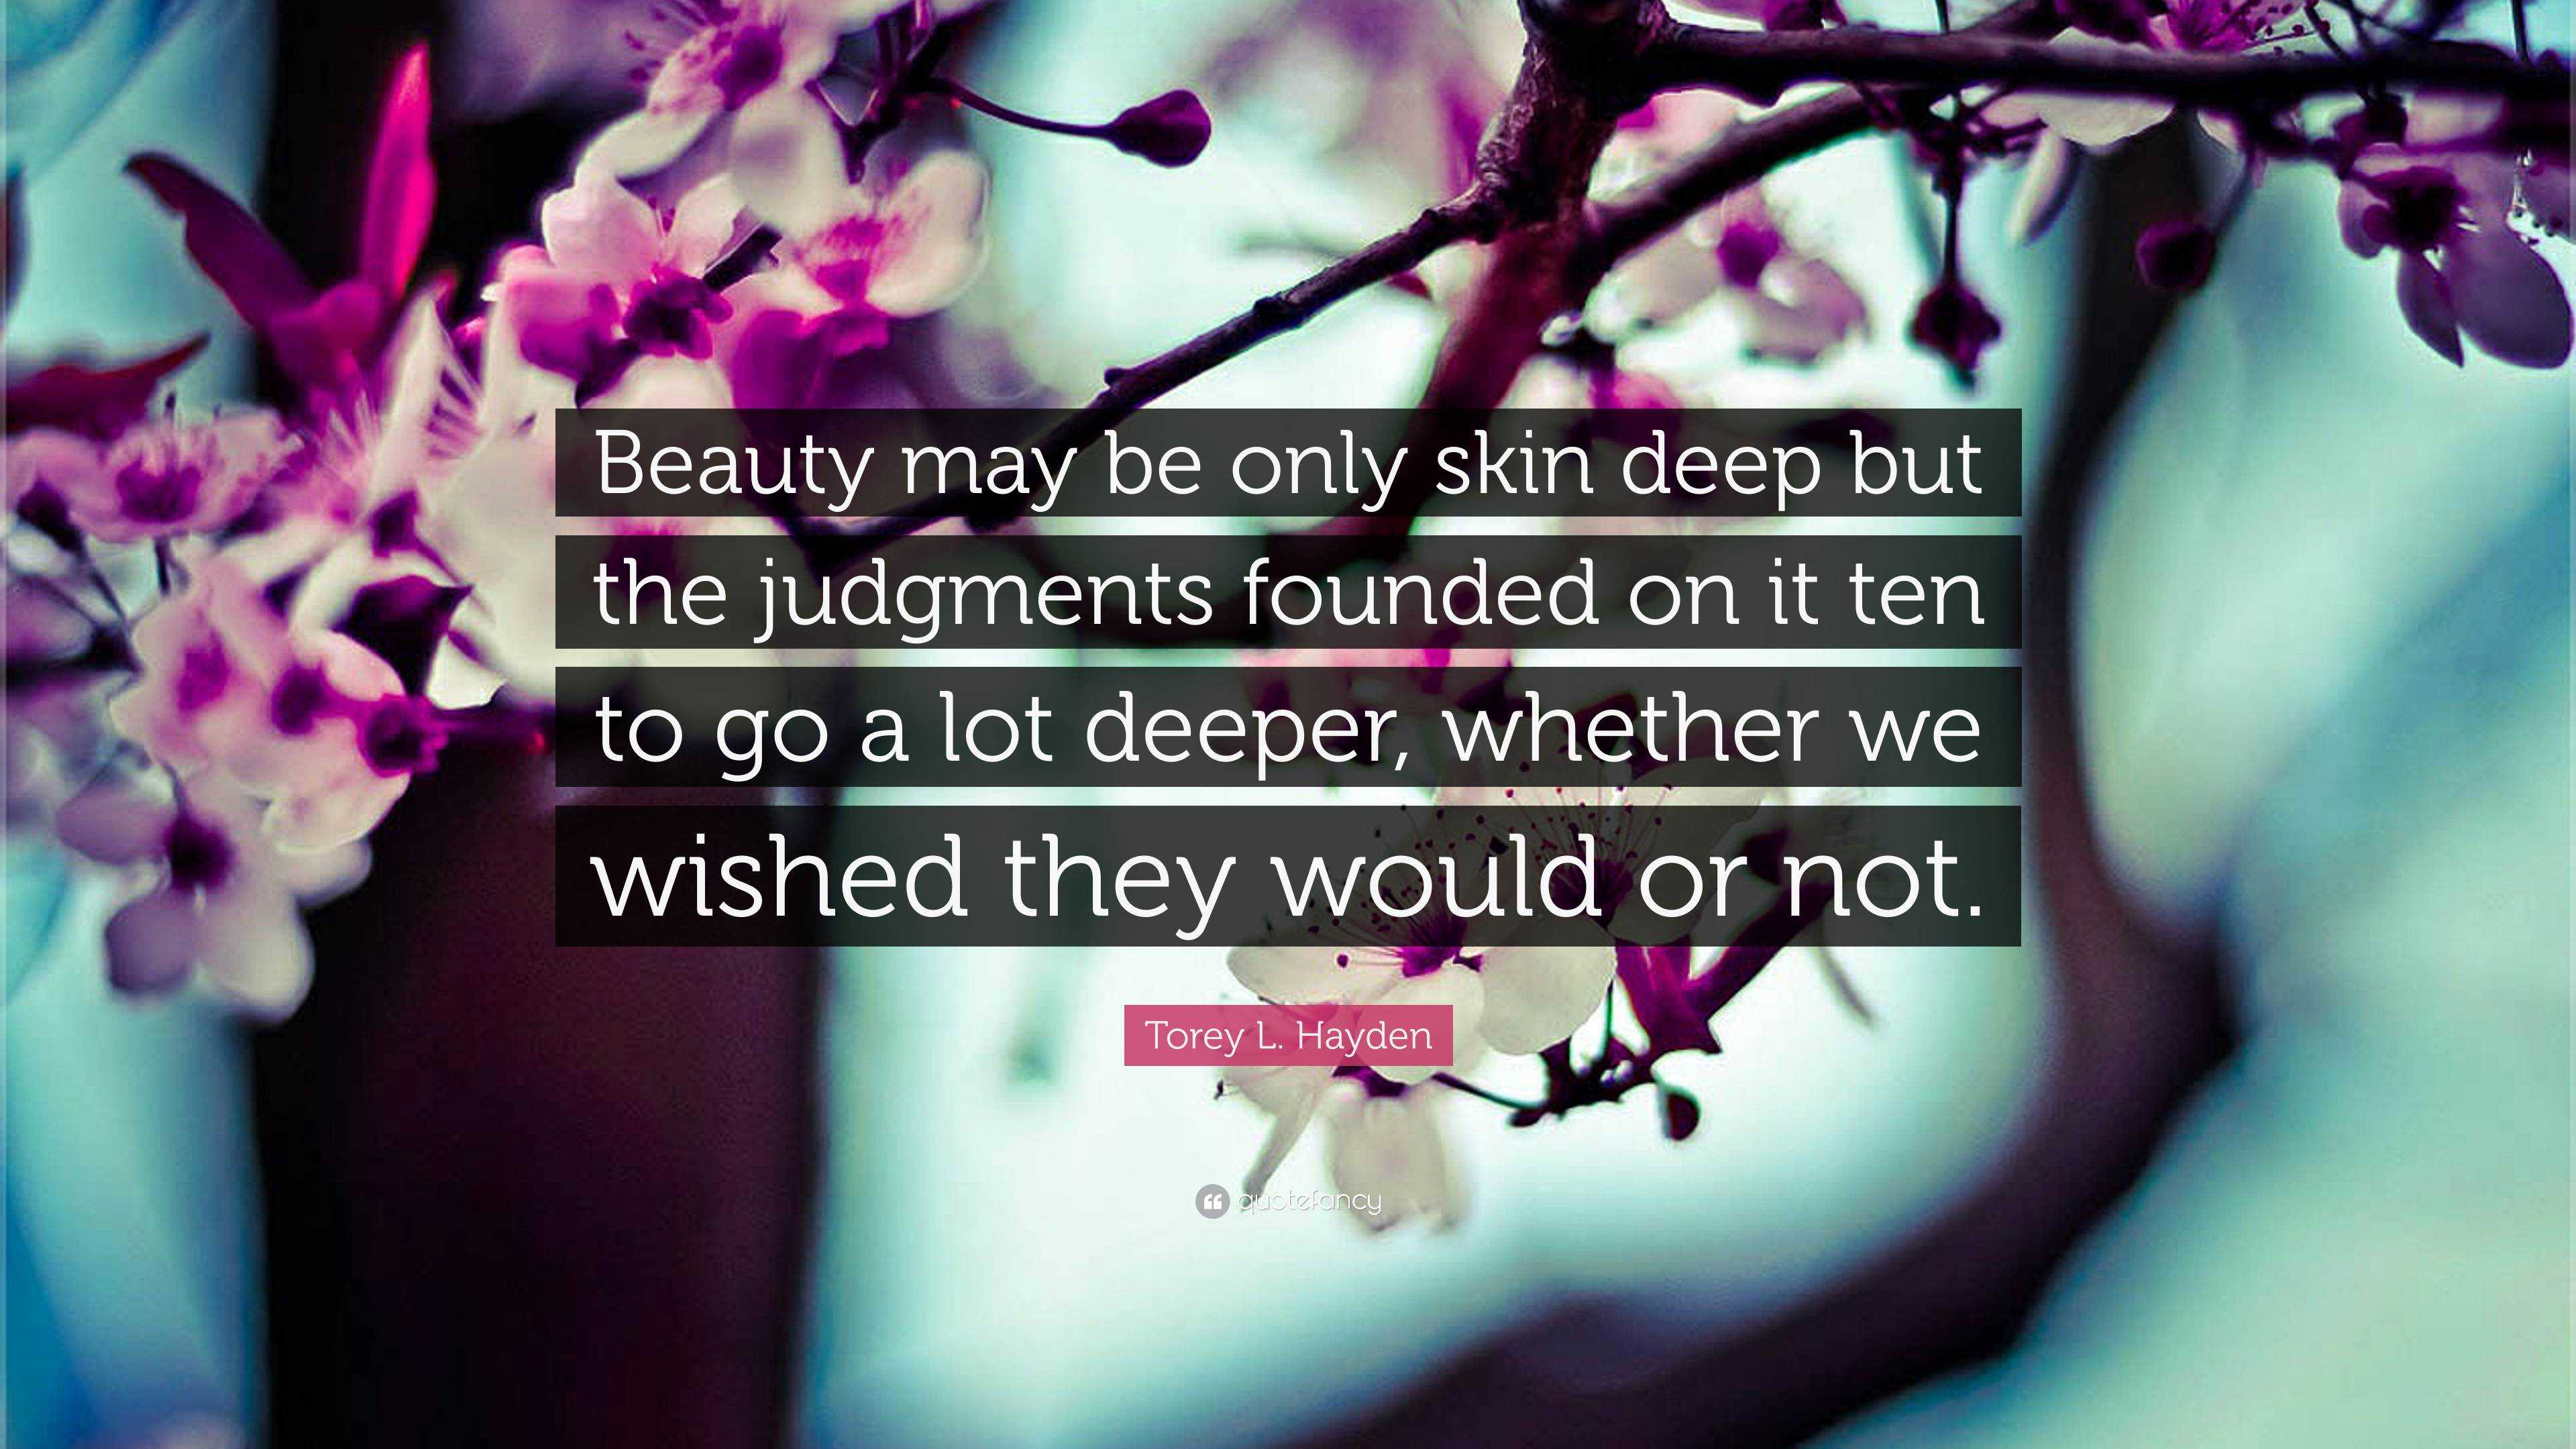 Torey L. Hayden Quote: “Beauty may be only skin deep but the judgments ...